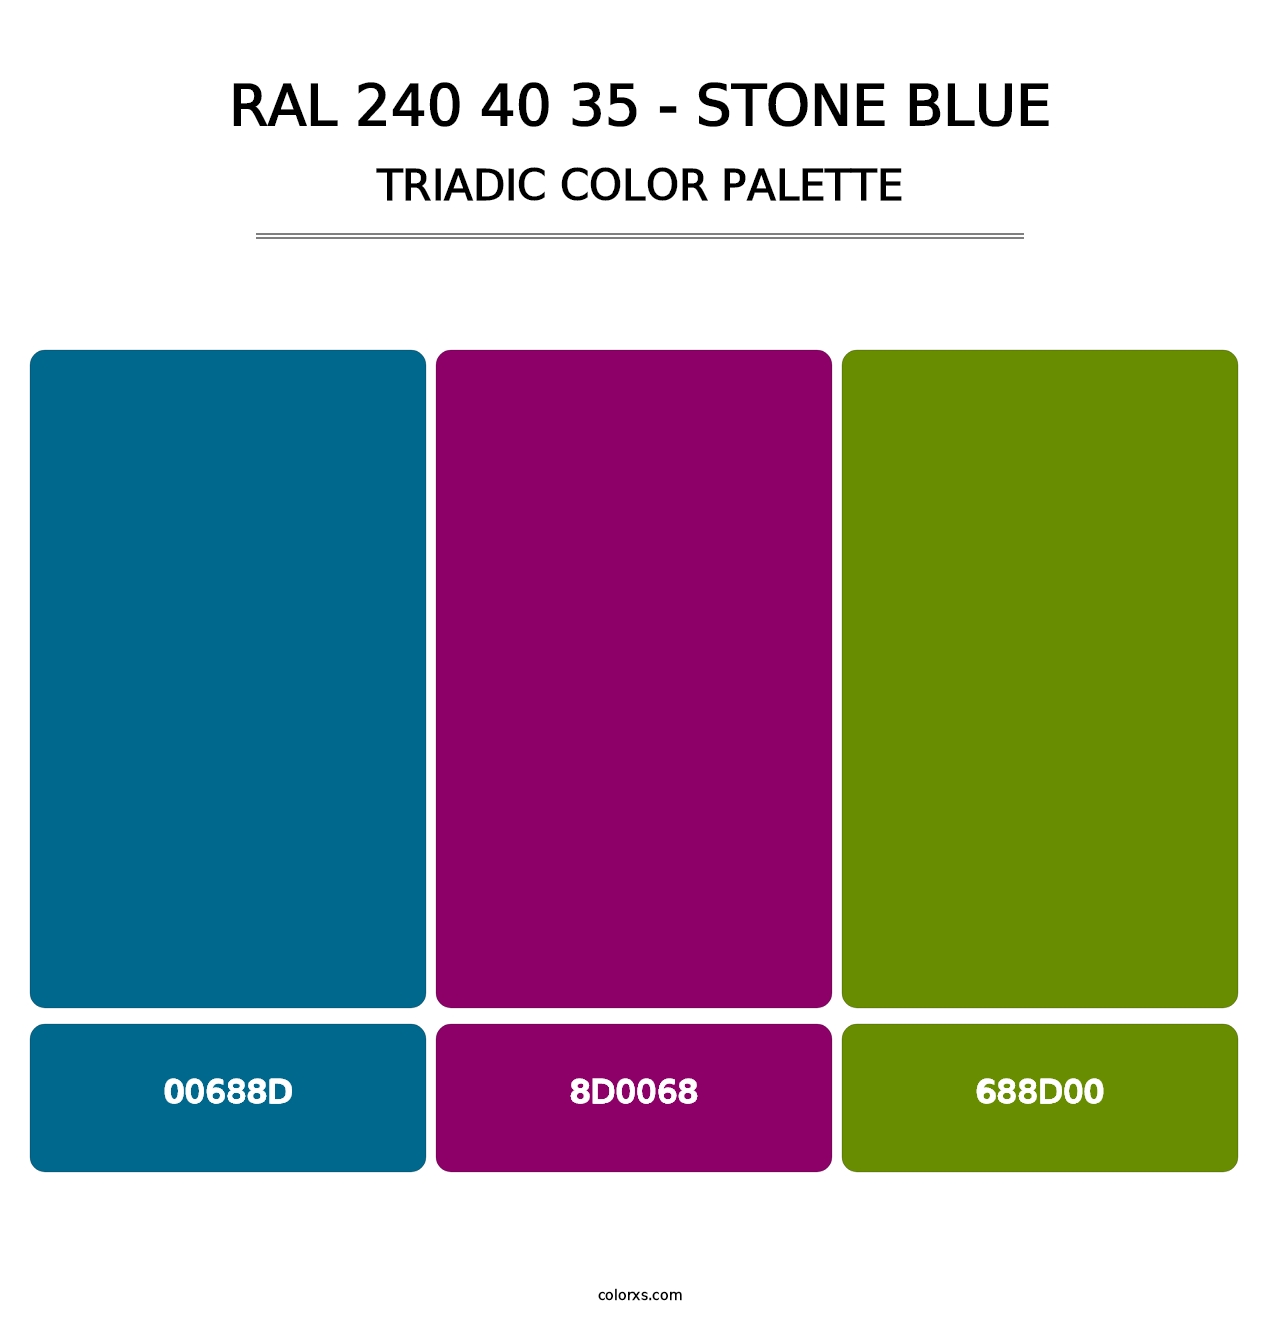 RAL 240 40 35 - Stone Blue - Triadic Color Palette